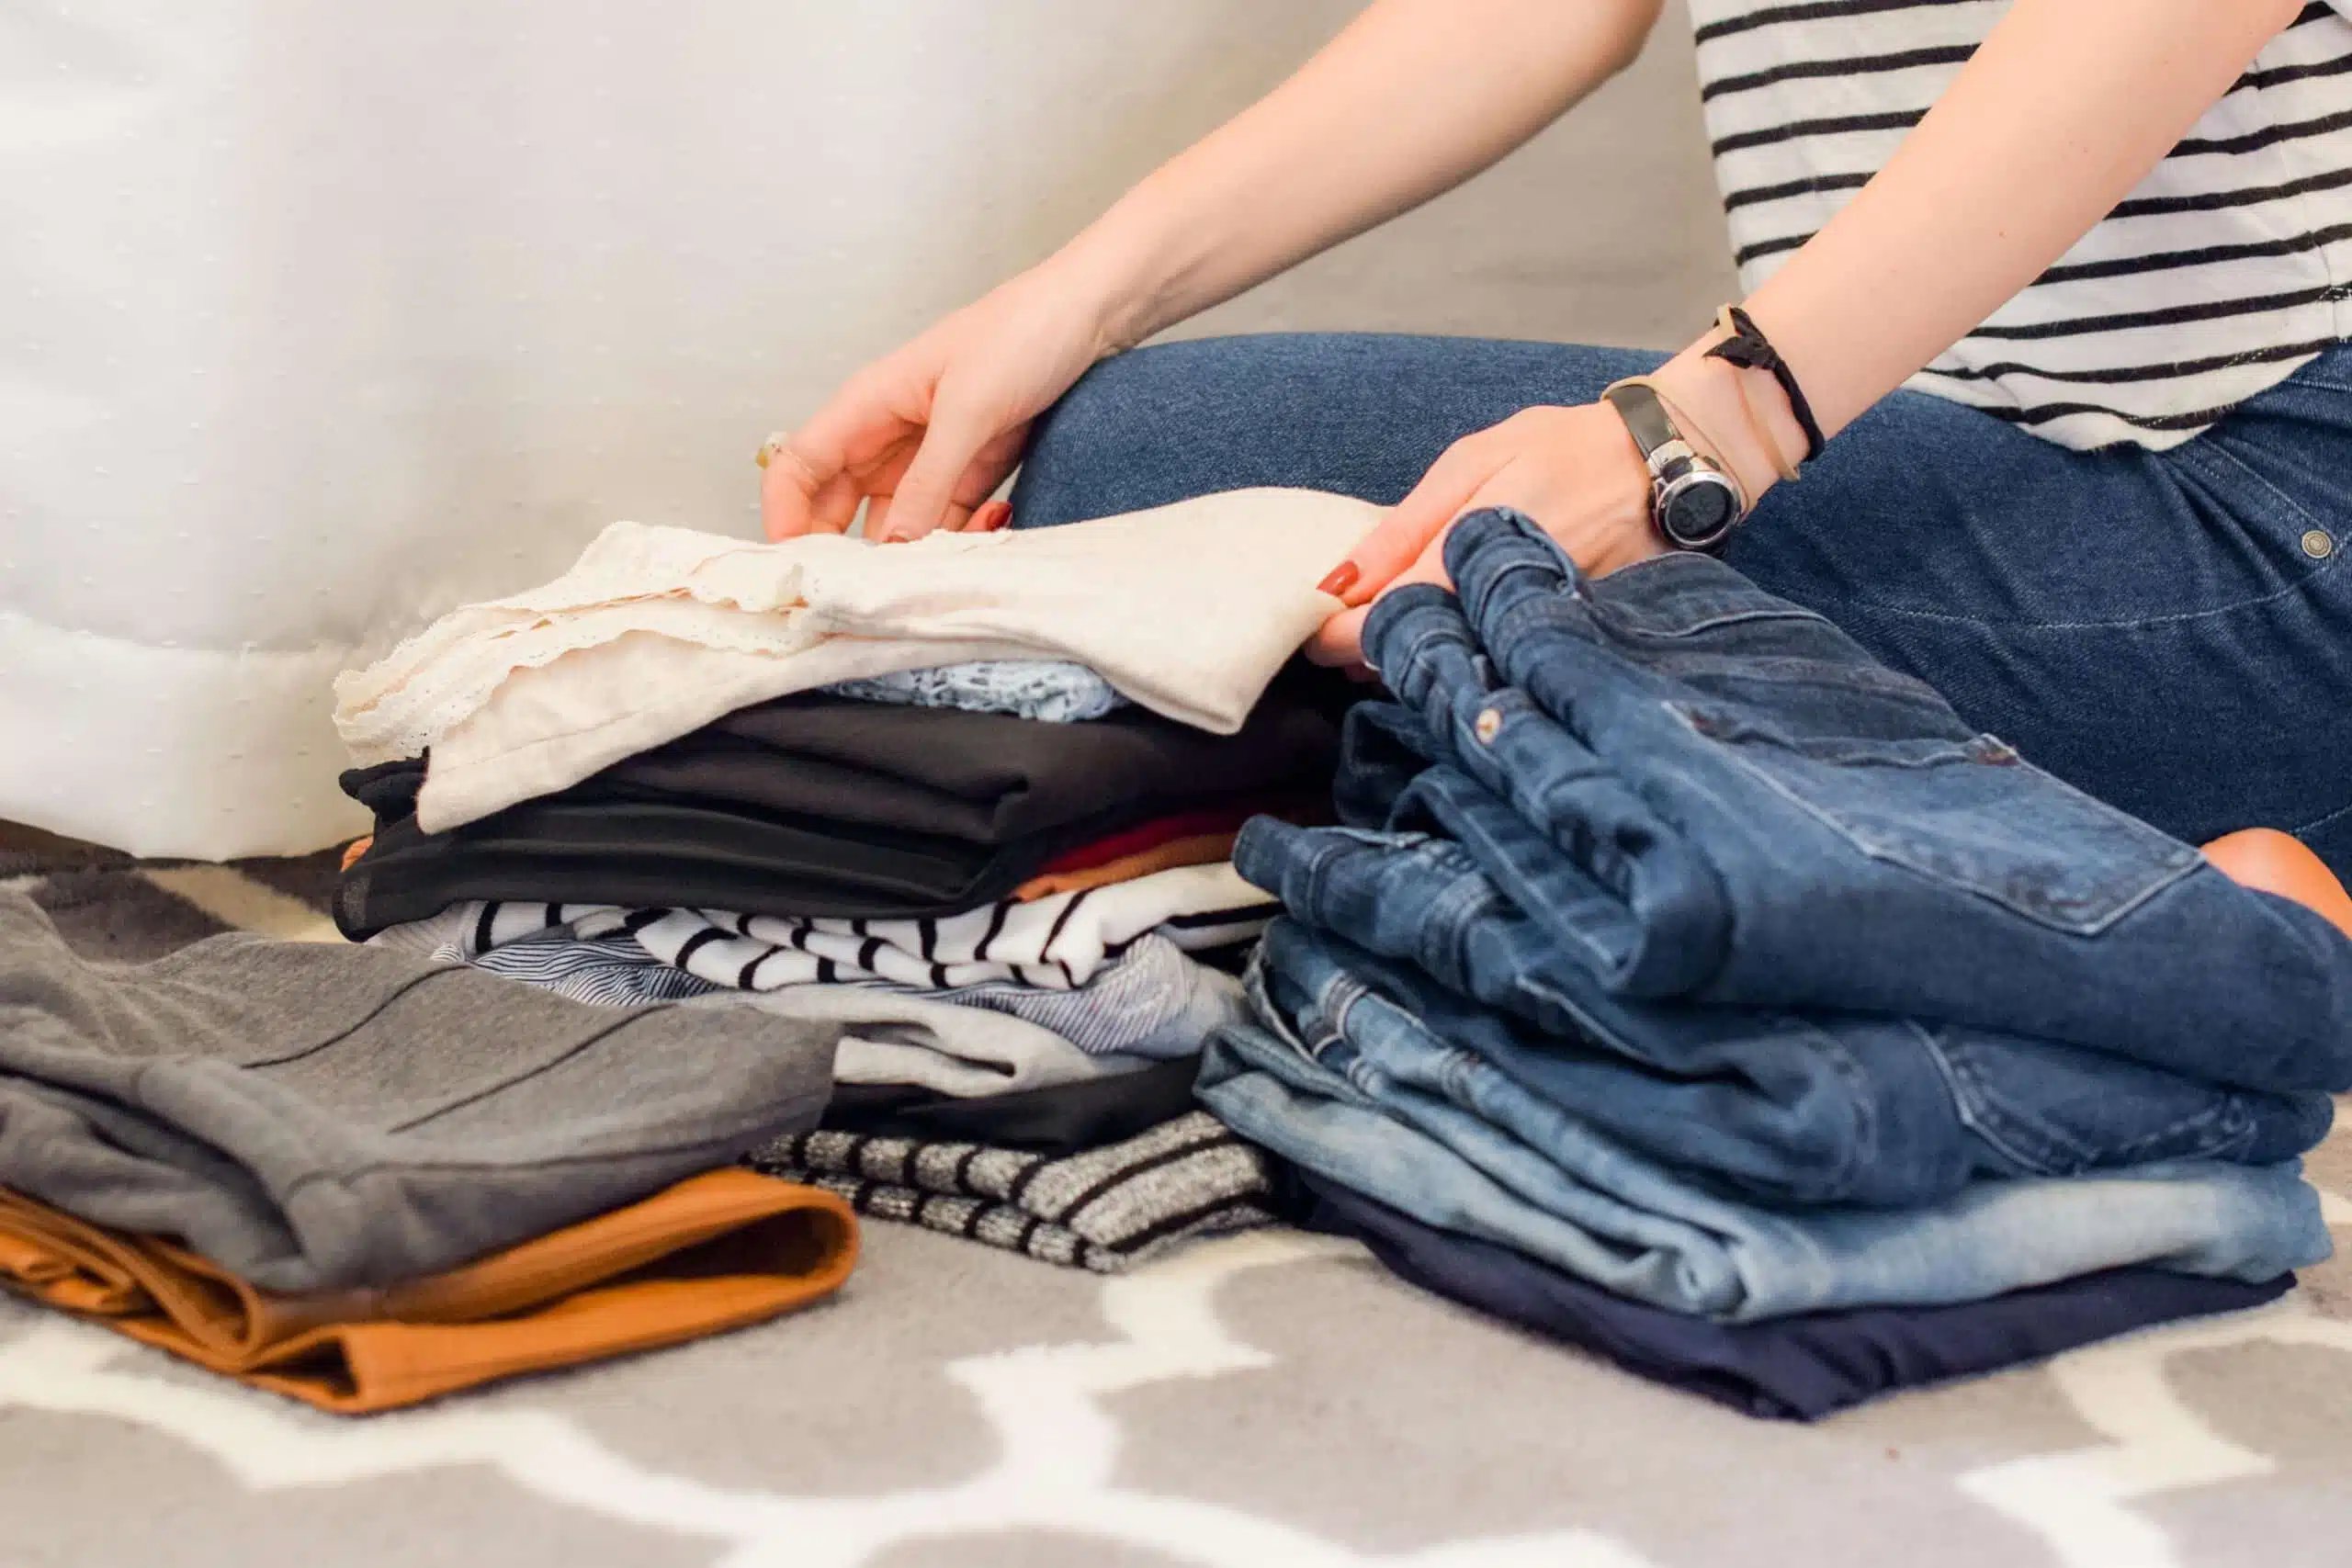 Woman folding clothes. Photo by Sarah Brown on Unsplash.